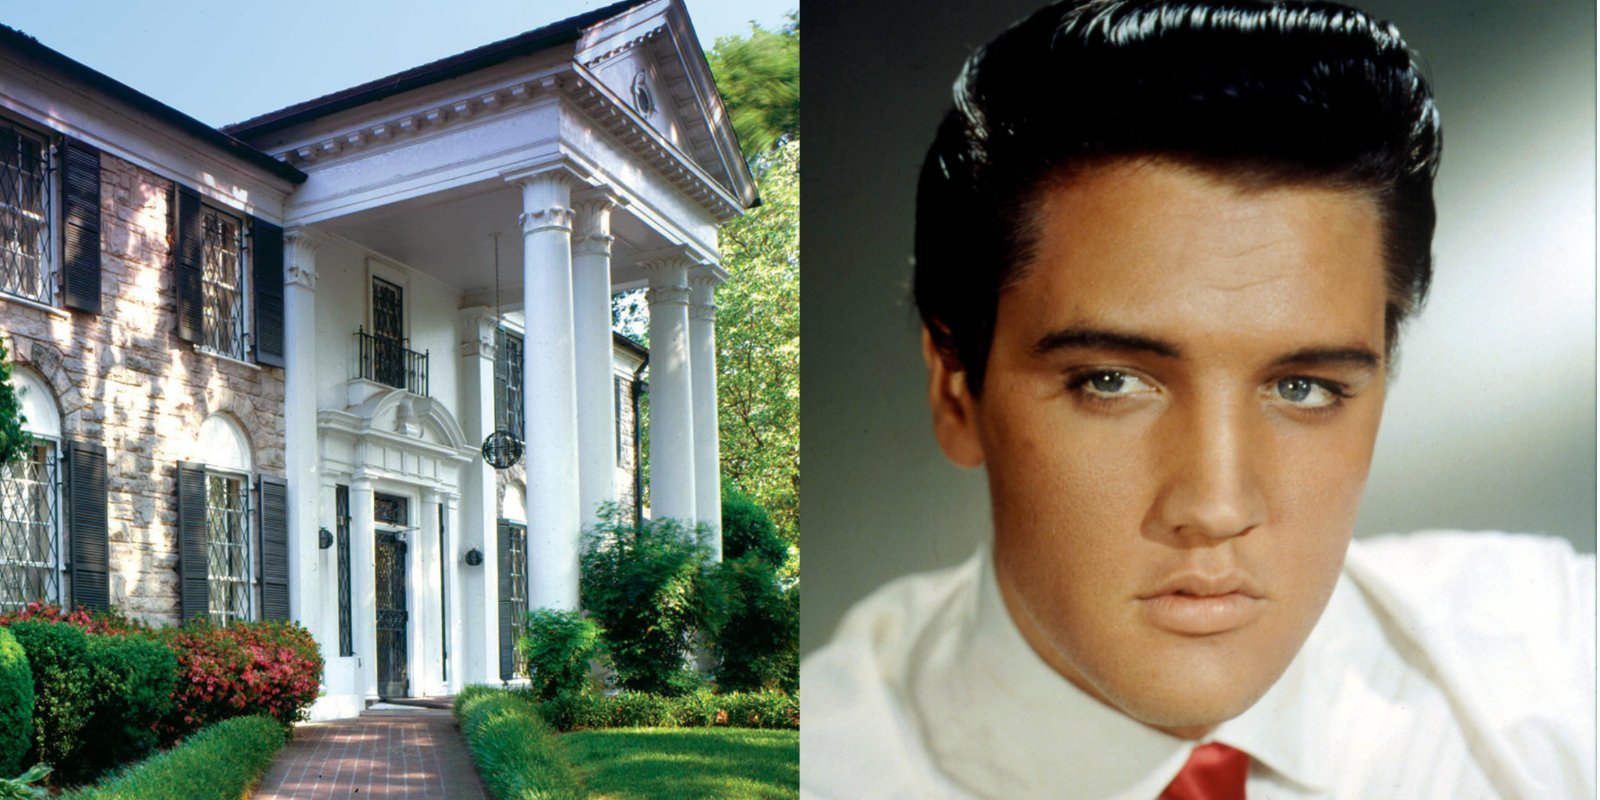 Side by side photos of Graceland Mansion and Elvis Presley, its owner.